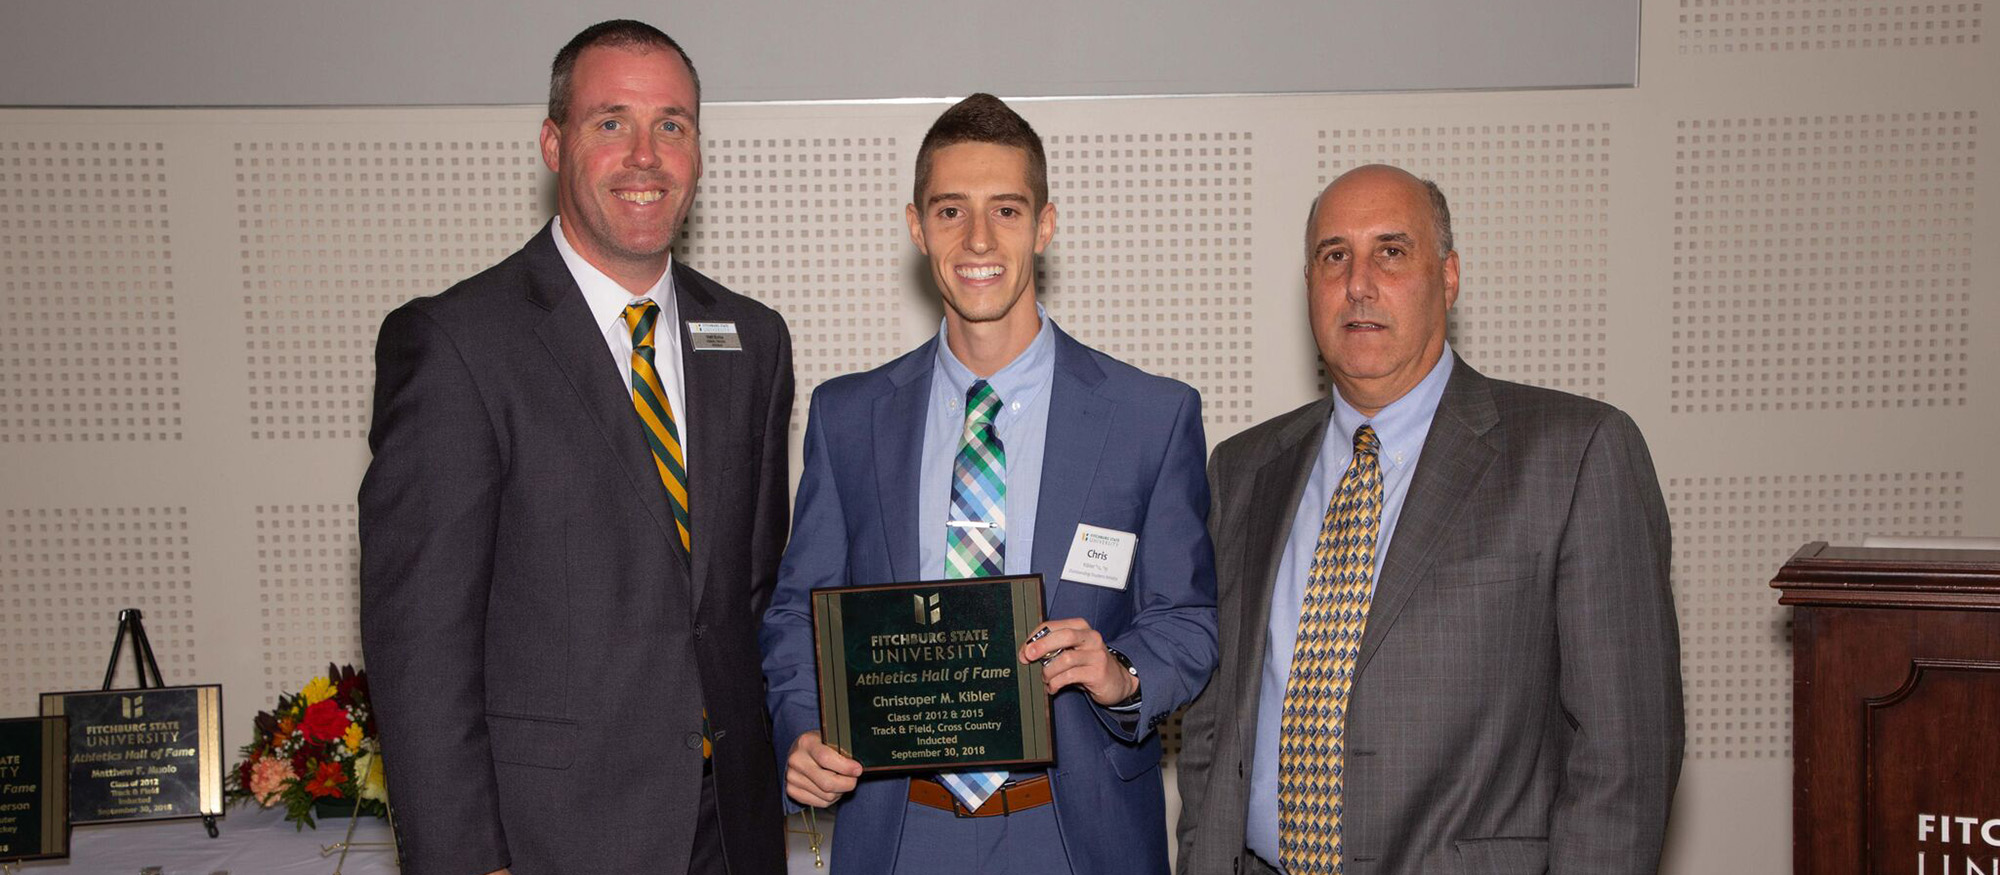 MHC head cross country and track & field coach, Chris Kibler is pictured with representatives from Fitchburg State during his induction into the Fitchburg State Athletics Hall of Fame.